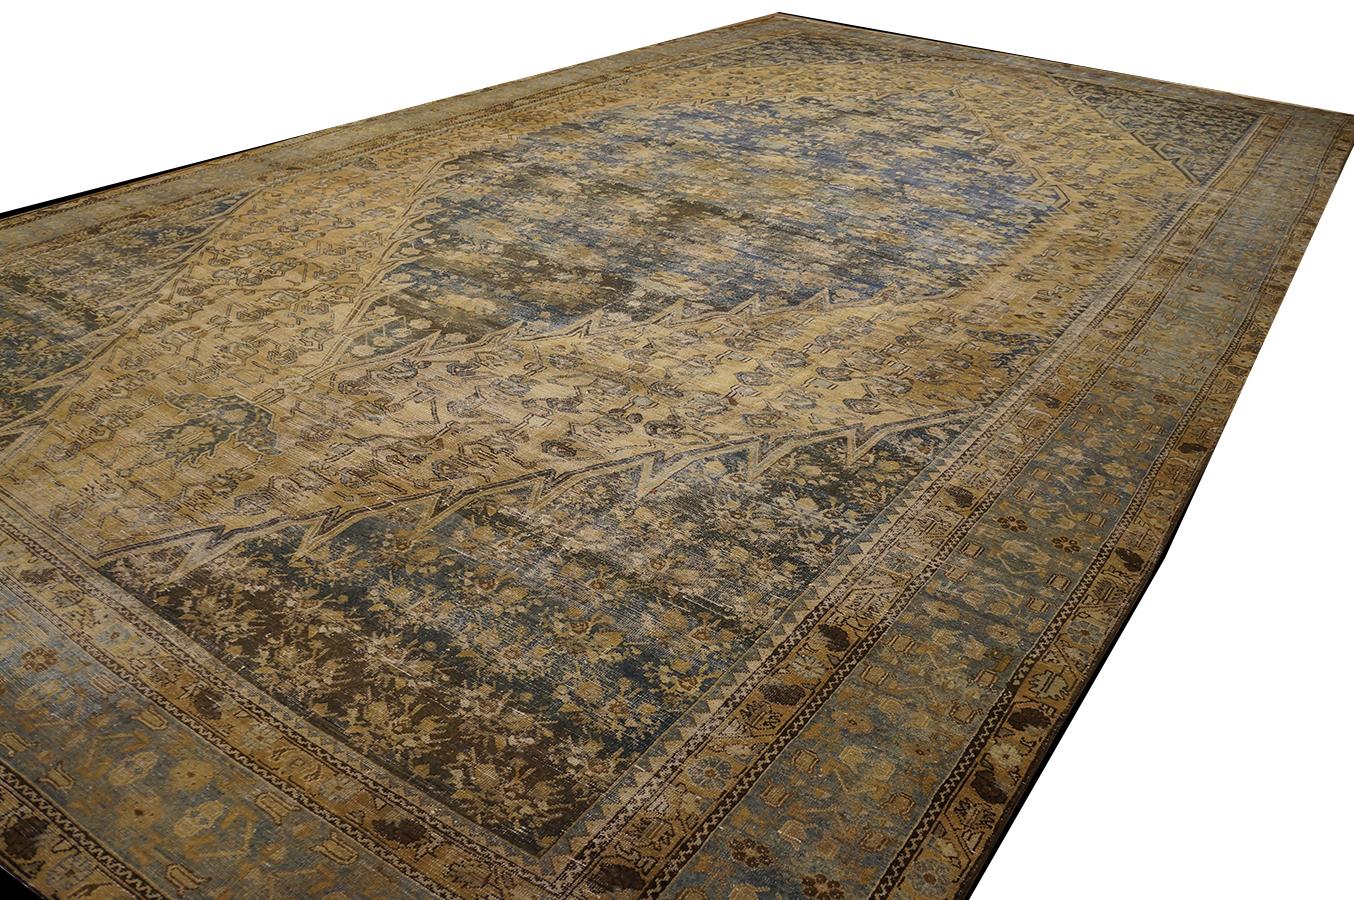 Early 20th Century Persian Malayer Carpet ( 12'3'' x 21'2'' - 373 x 645 ) In Good Condition For Sale In New York, NY